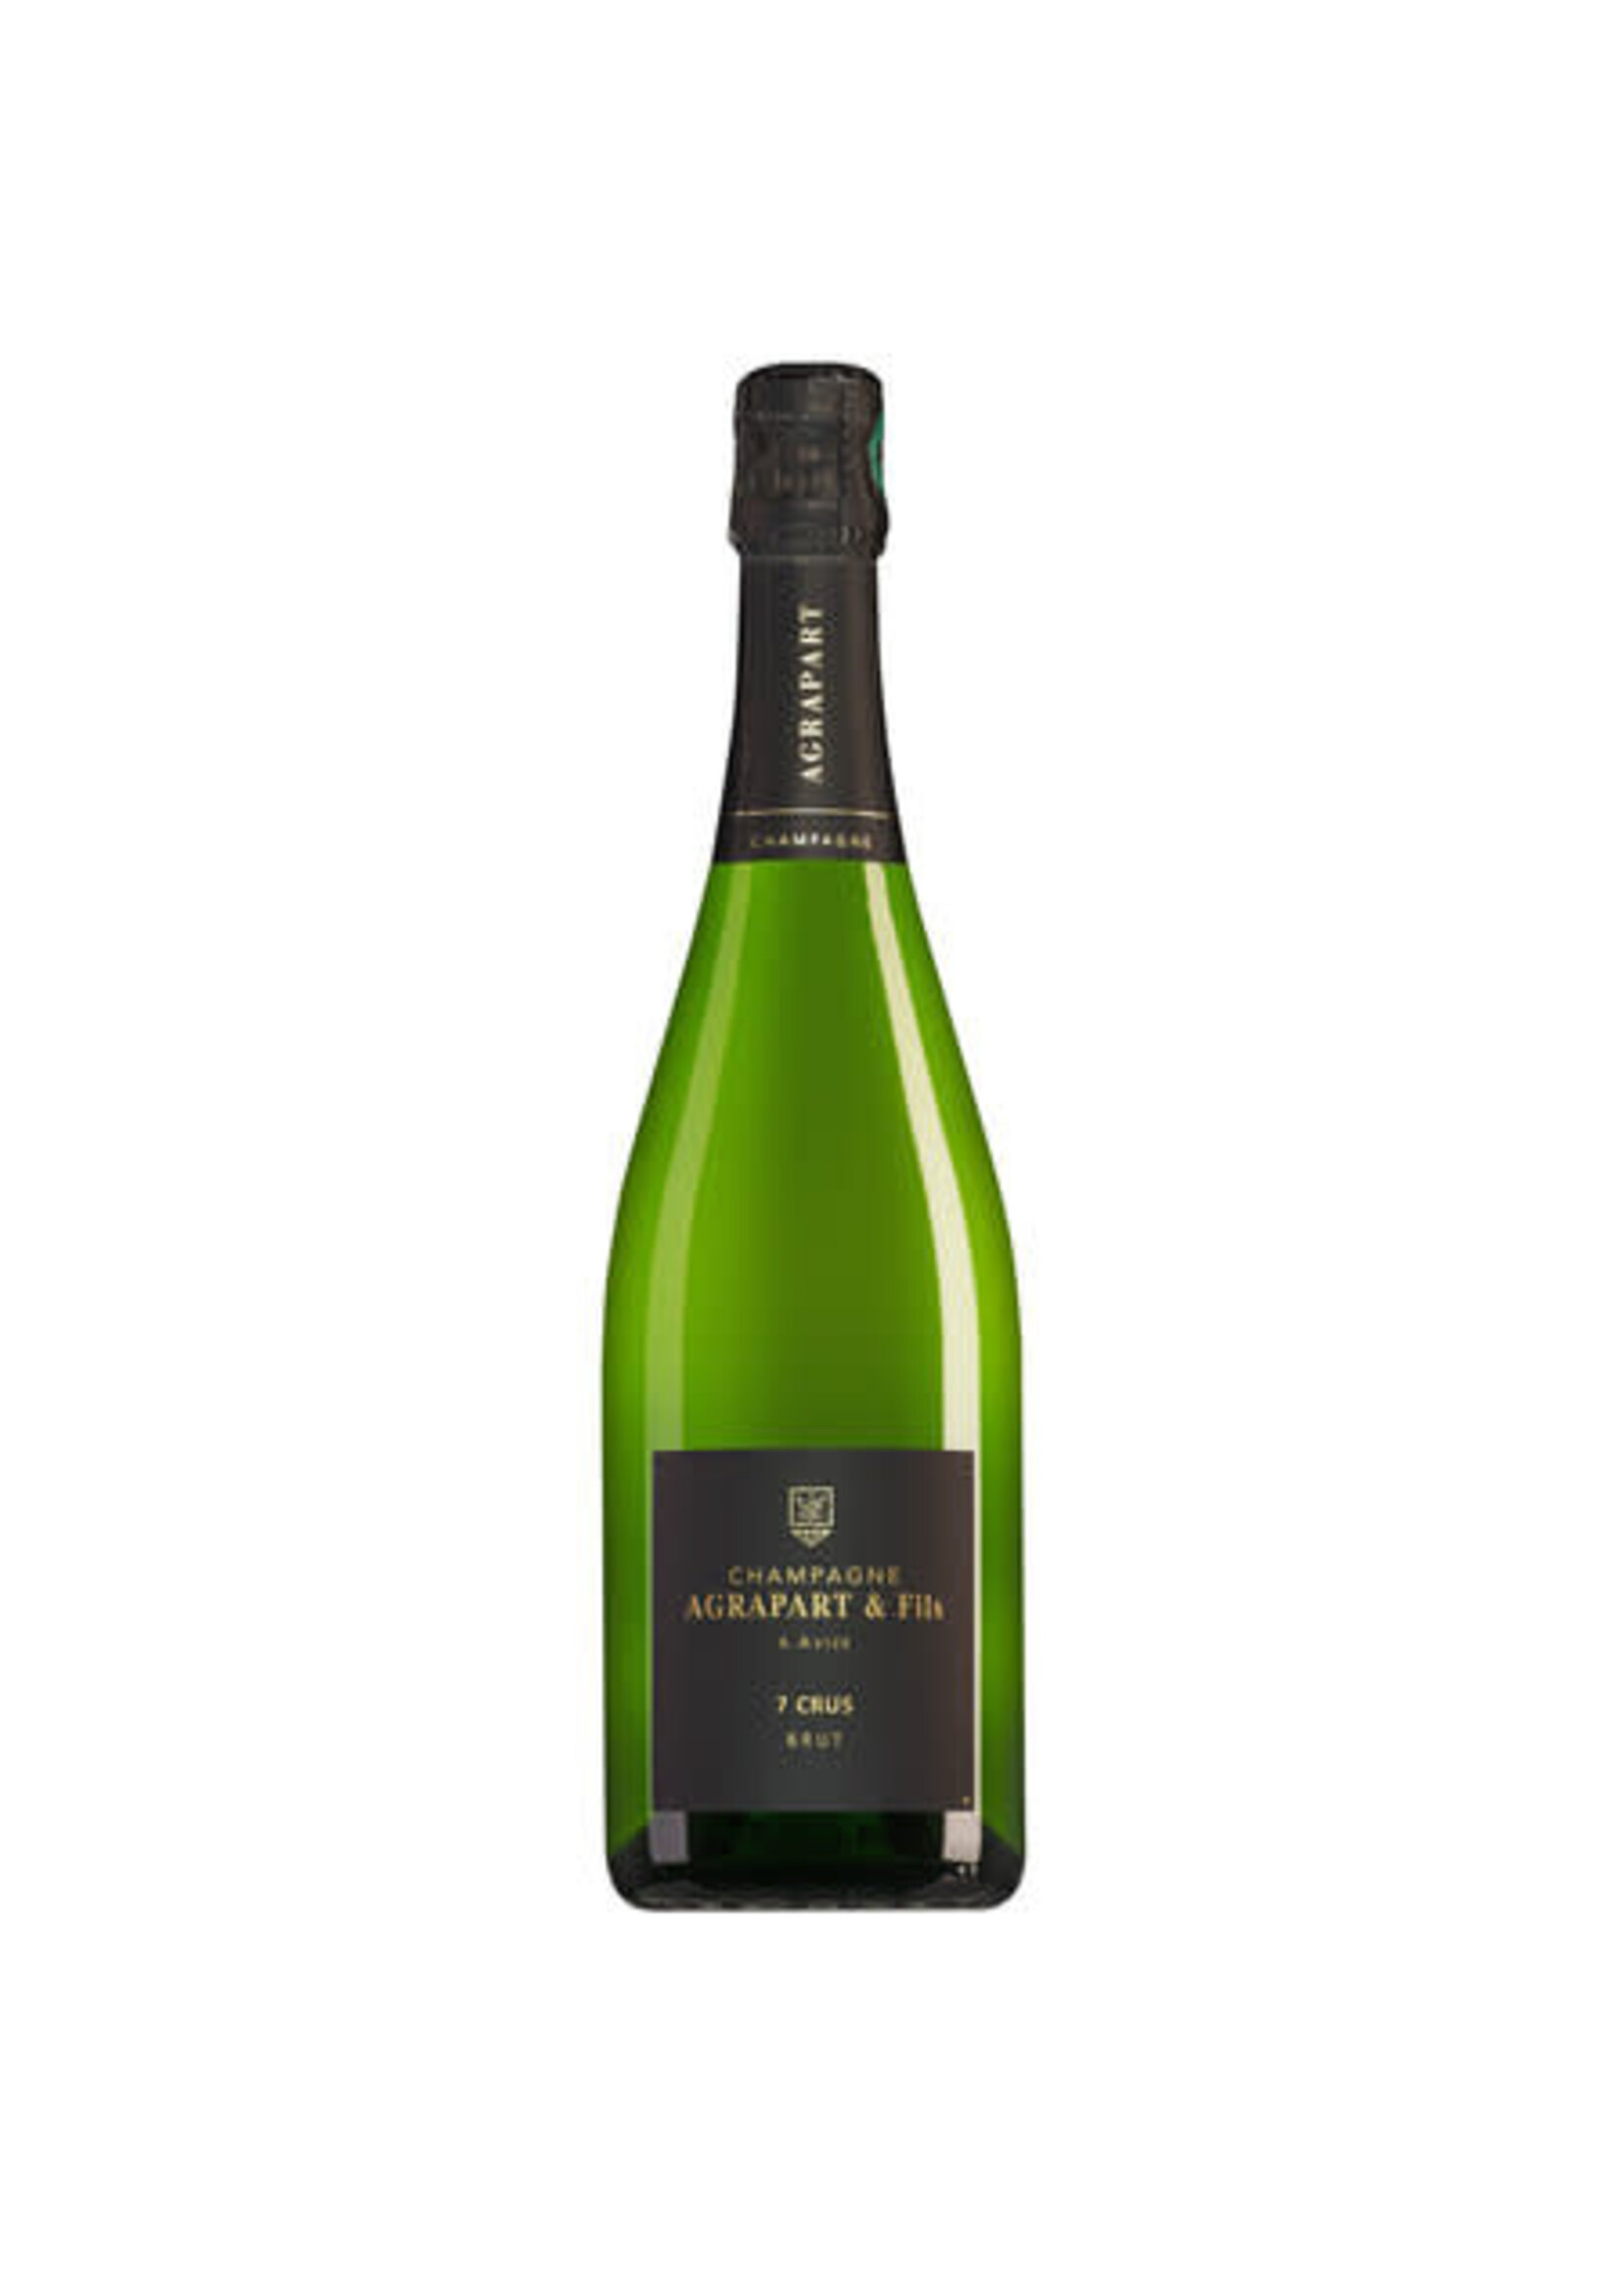 Agrapart & Fills Agrapart & Fills 7 Crus Brut 75 cl